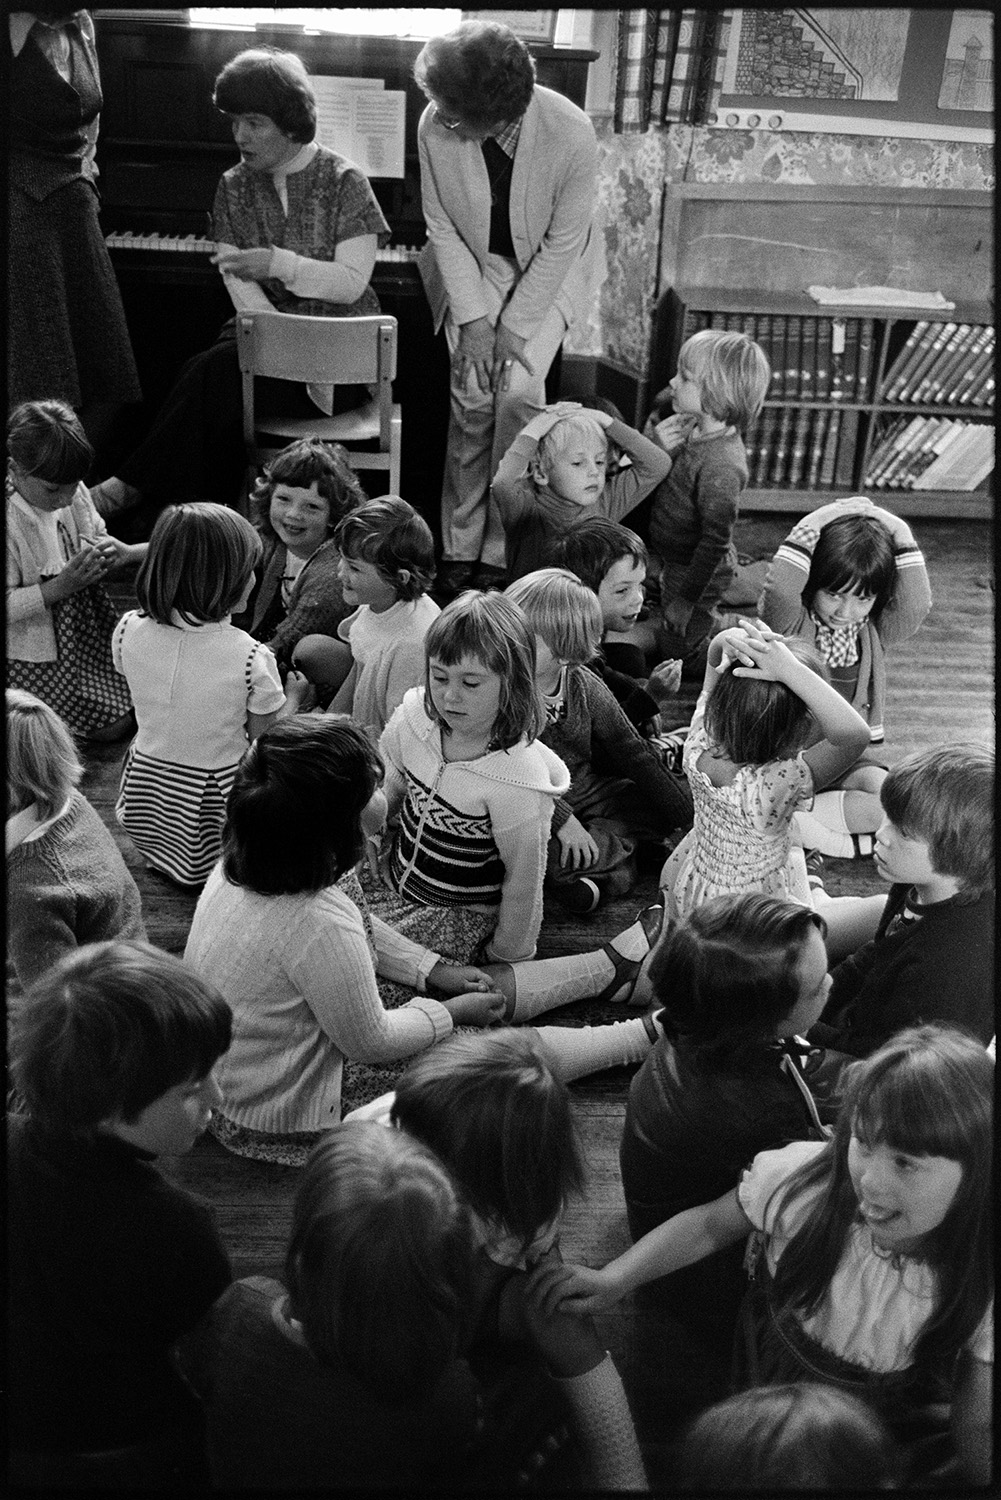 Children talking and laughing in an assembly at Blue Coats School, Torrington. Some of the children have their hands on their heads. Teachers can be seen in the background.